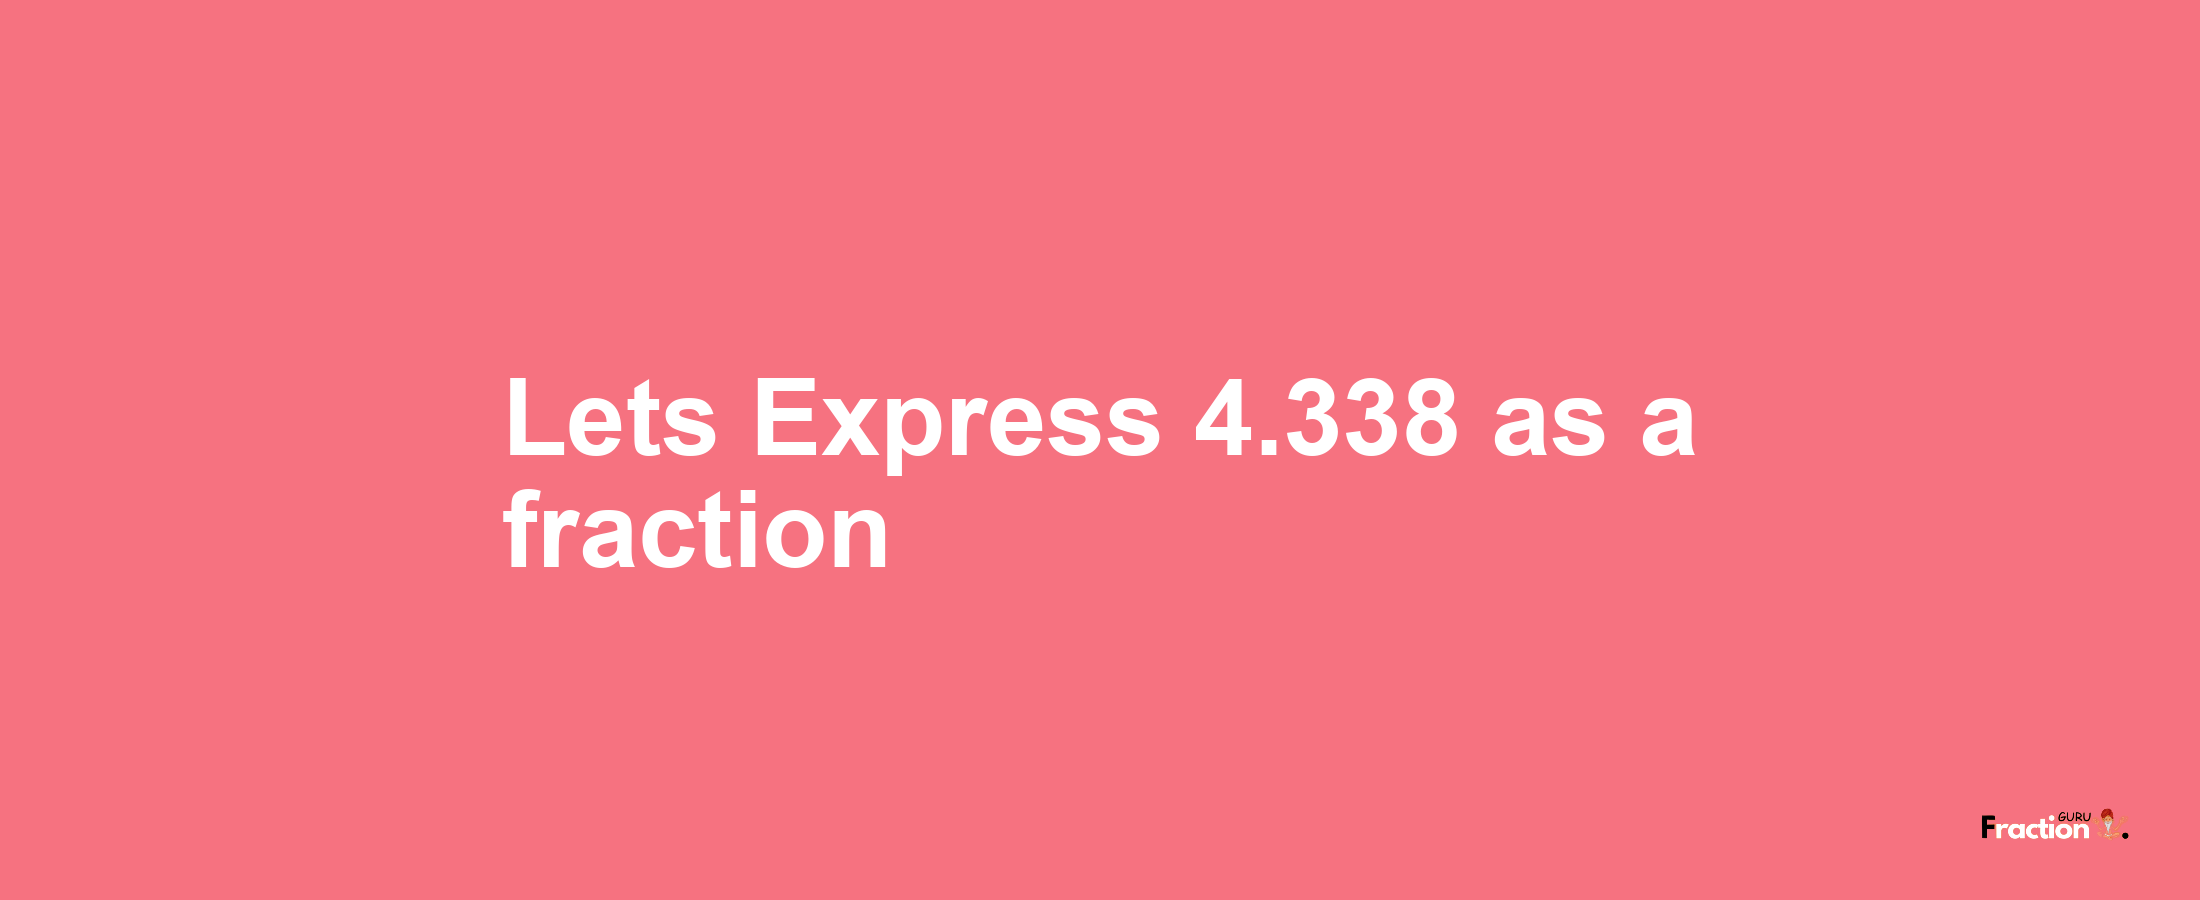 Lets Express 4.338 as afraction